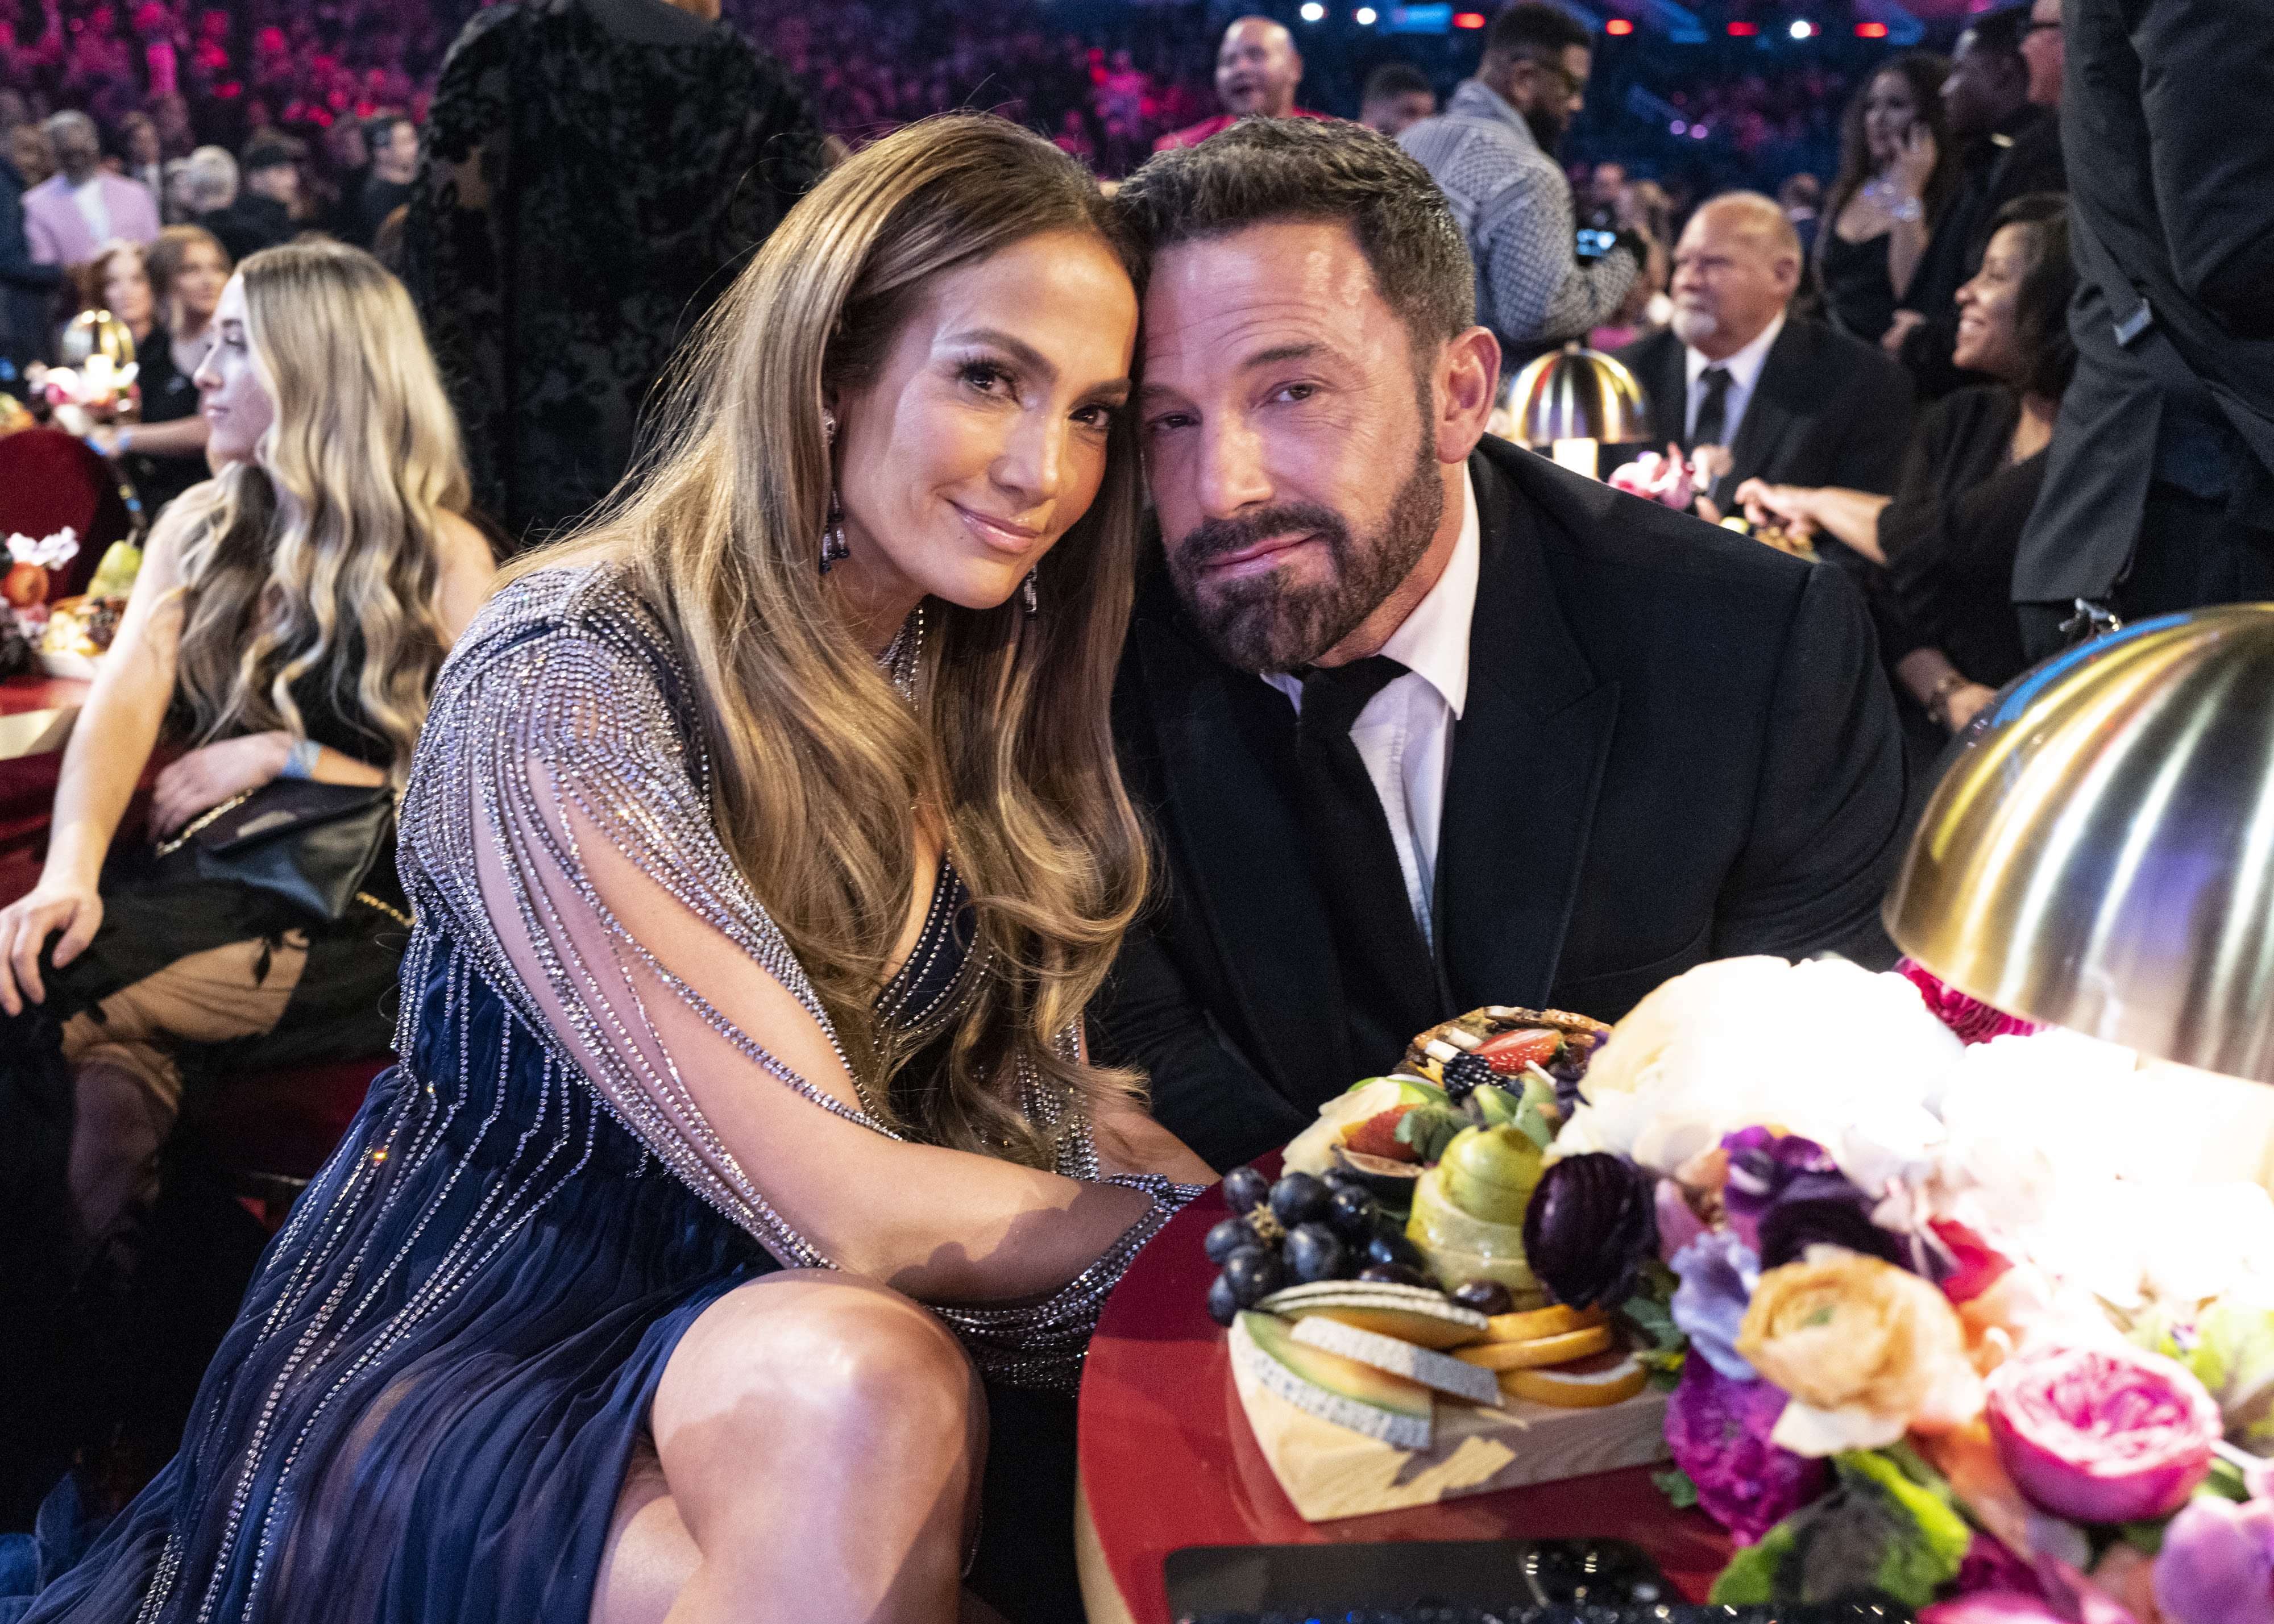 Ben Affleck and Jennifer Lopez Have Been ‘Spending Time Apart,’ He Needs ‘Out of Her Shadow’